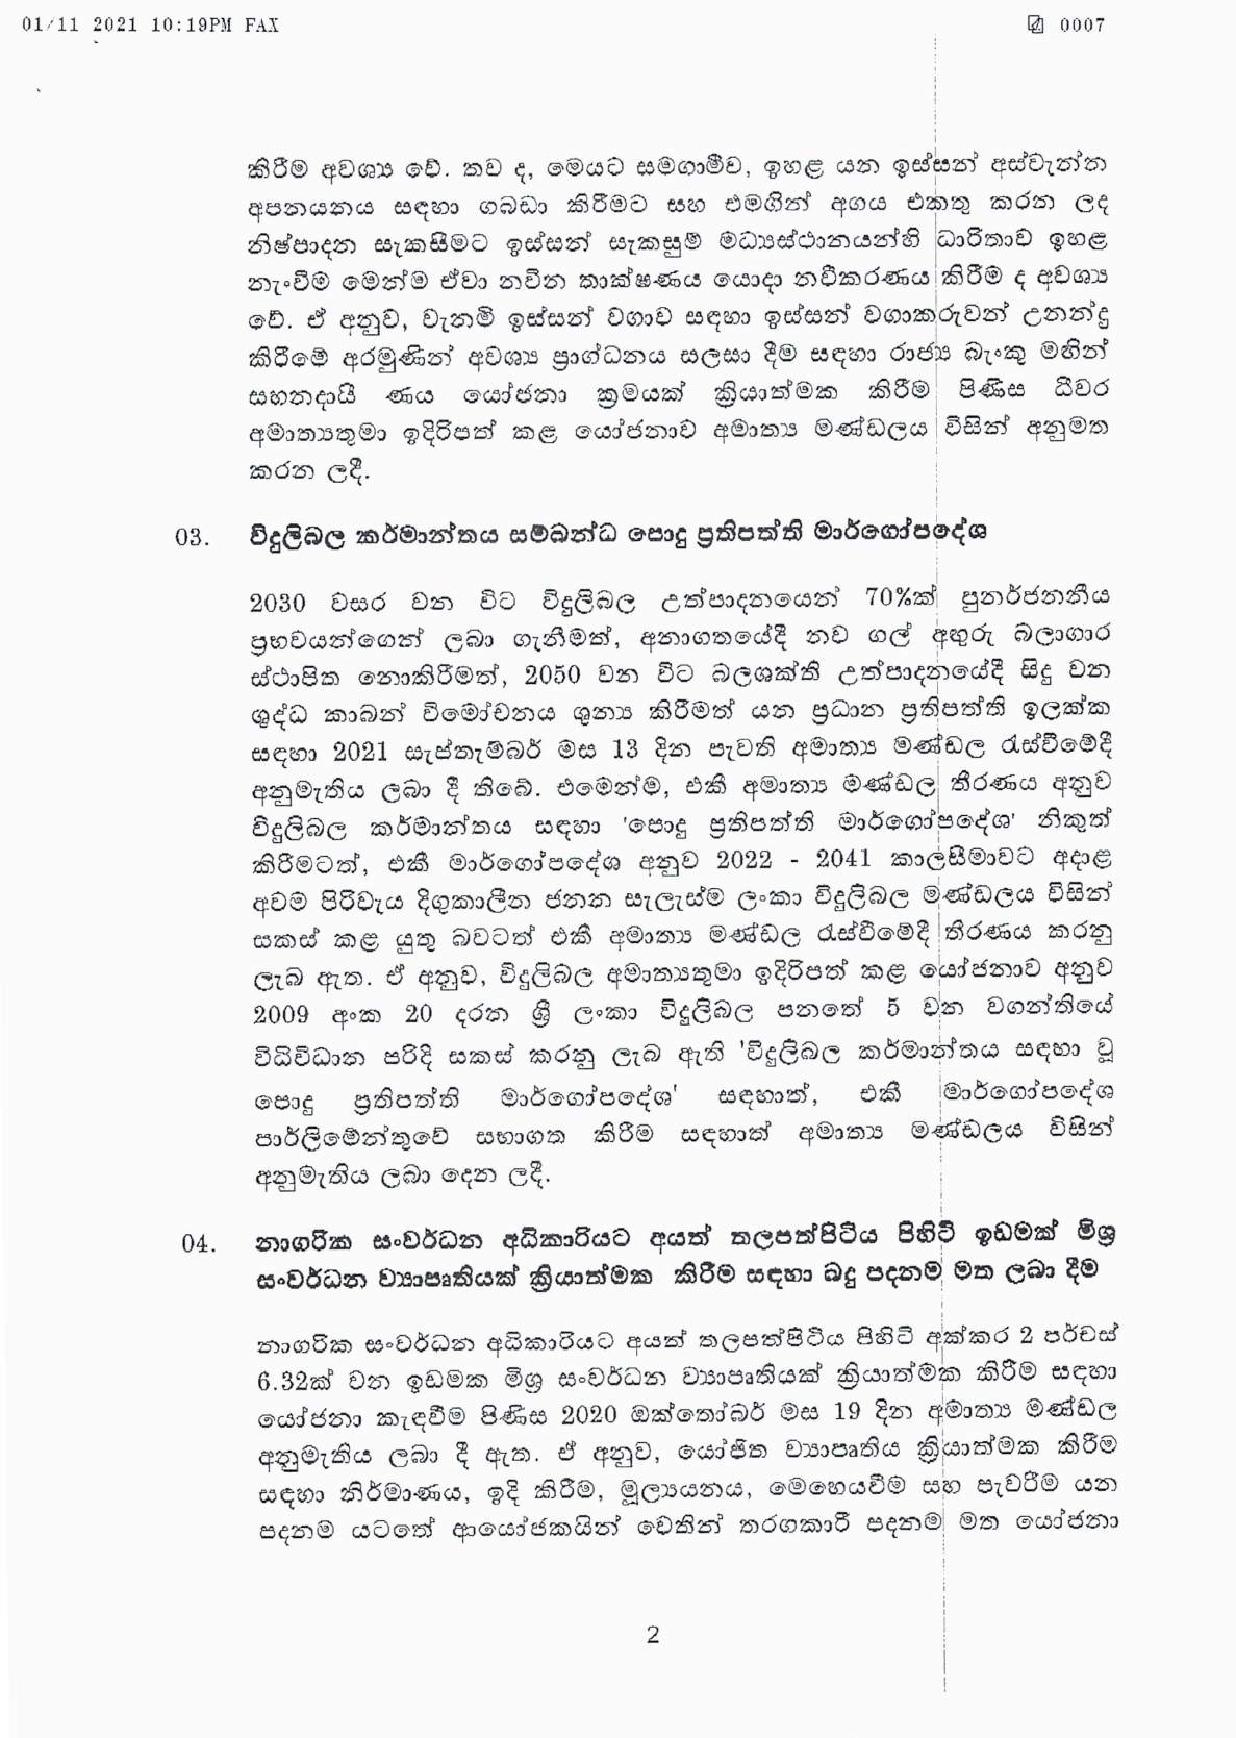 Cabinet Decisions on 01.11.2021 page 002